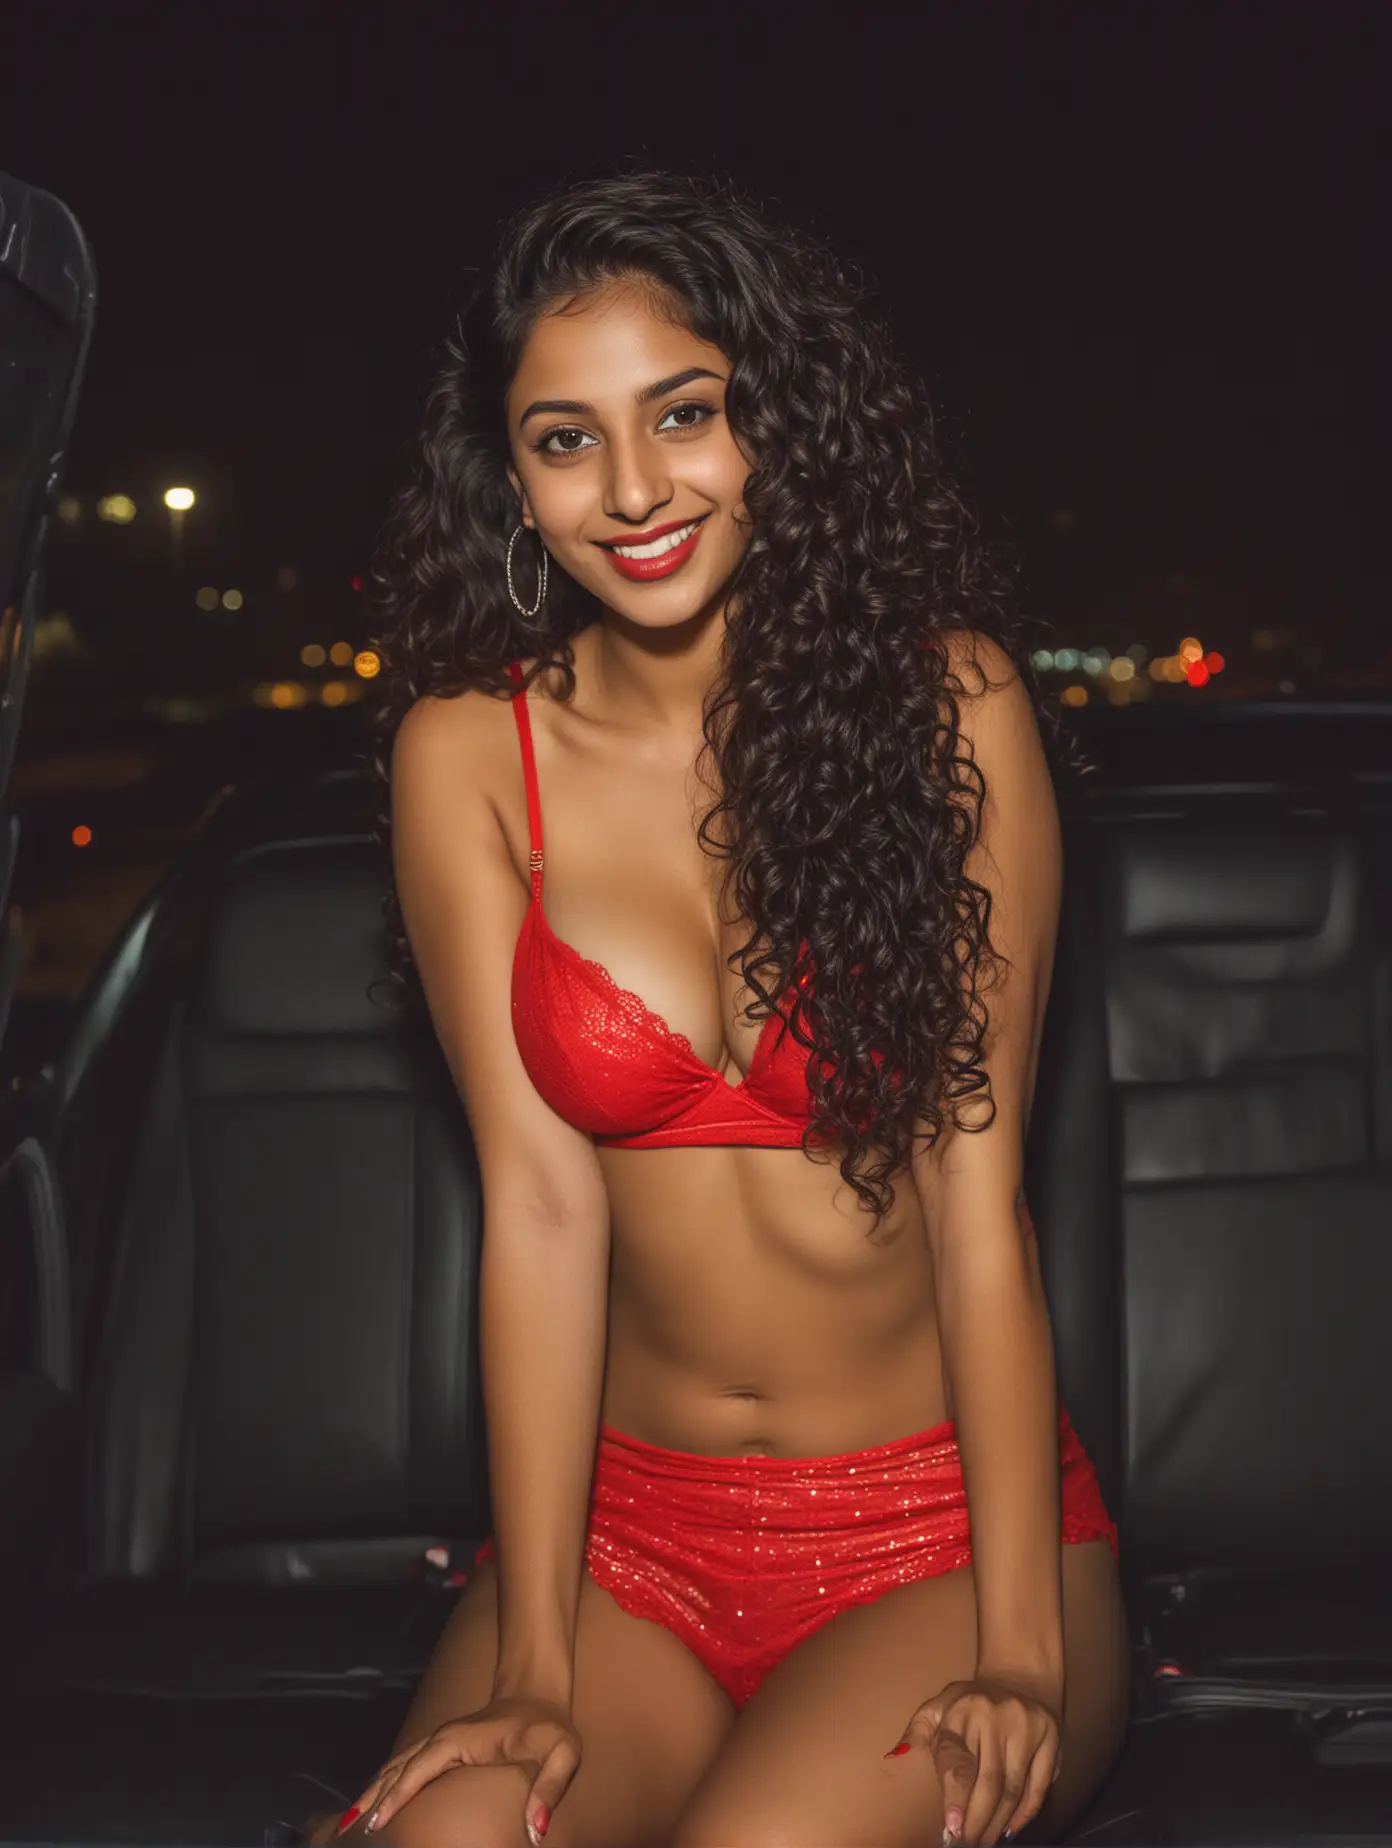 a full size portrait of a young 25 year old Indian sikh girl, thick built, fair complexion, long curly hair, beautiful smile with perfect teeth,big breasts and cleavage, bright red lipstick, wearing only a panty- nothing else, sitting in a car, nighttime scene, long sexy legs, photo clicked from a distance under flash with Canon EOS 1Dx Mark 3 camera.


